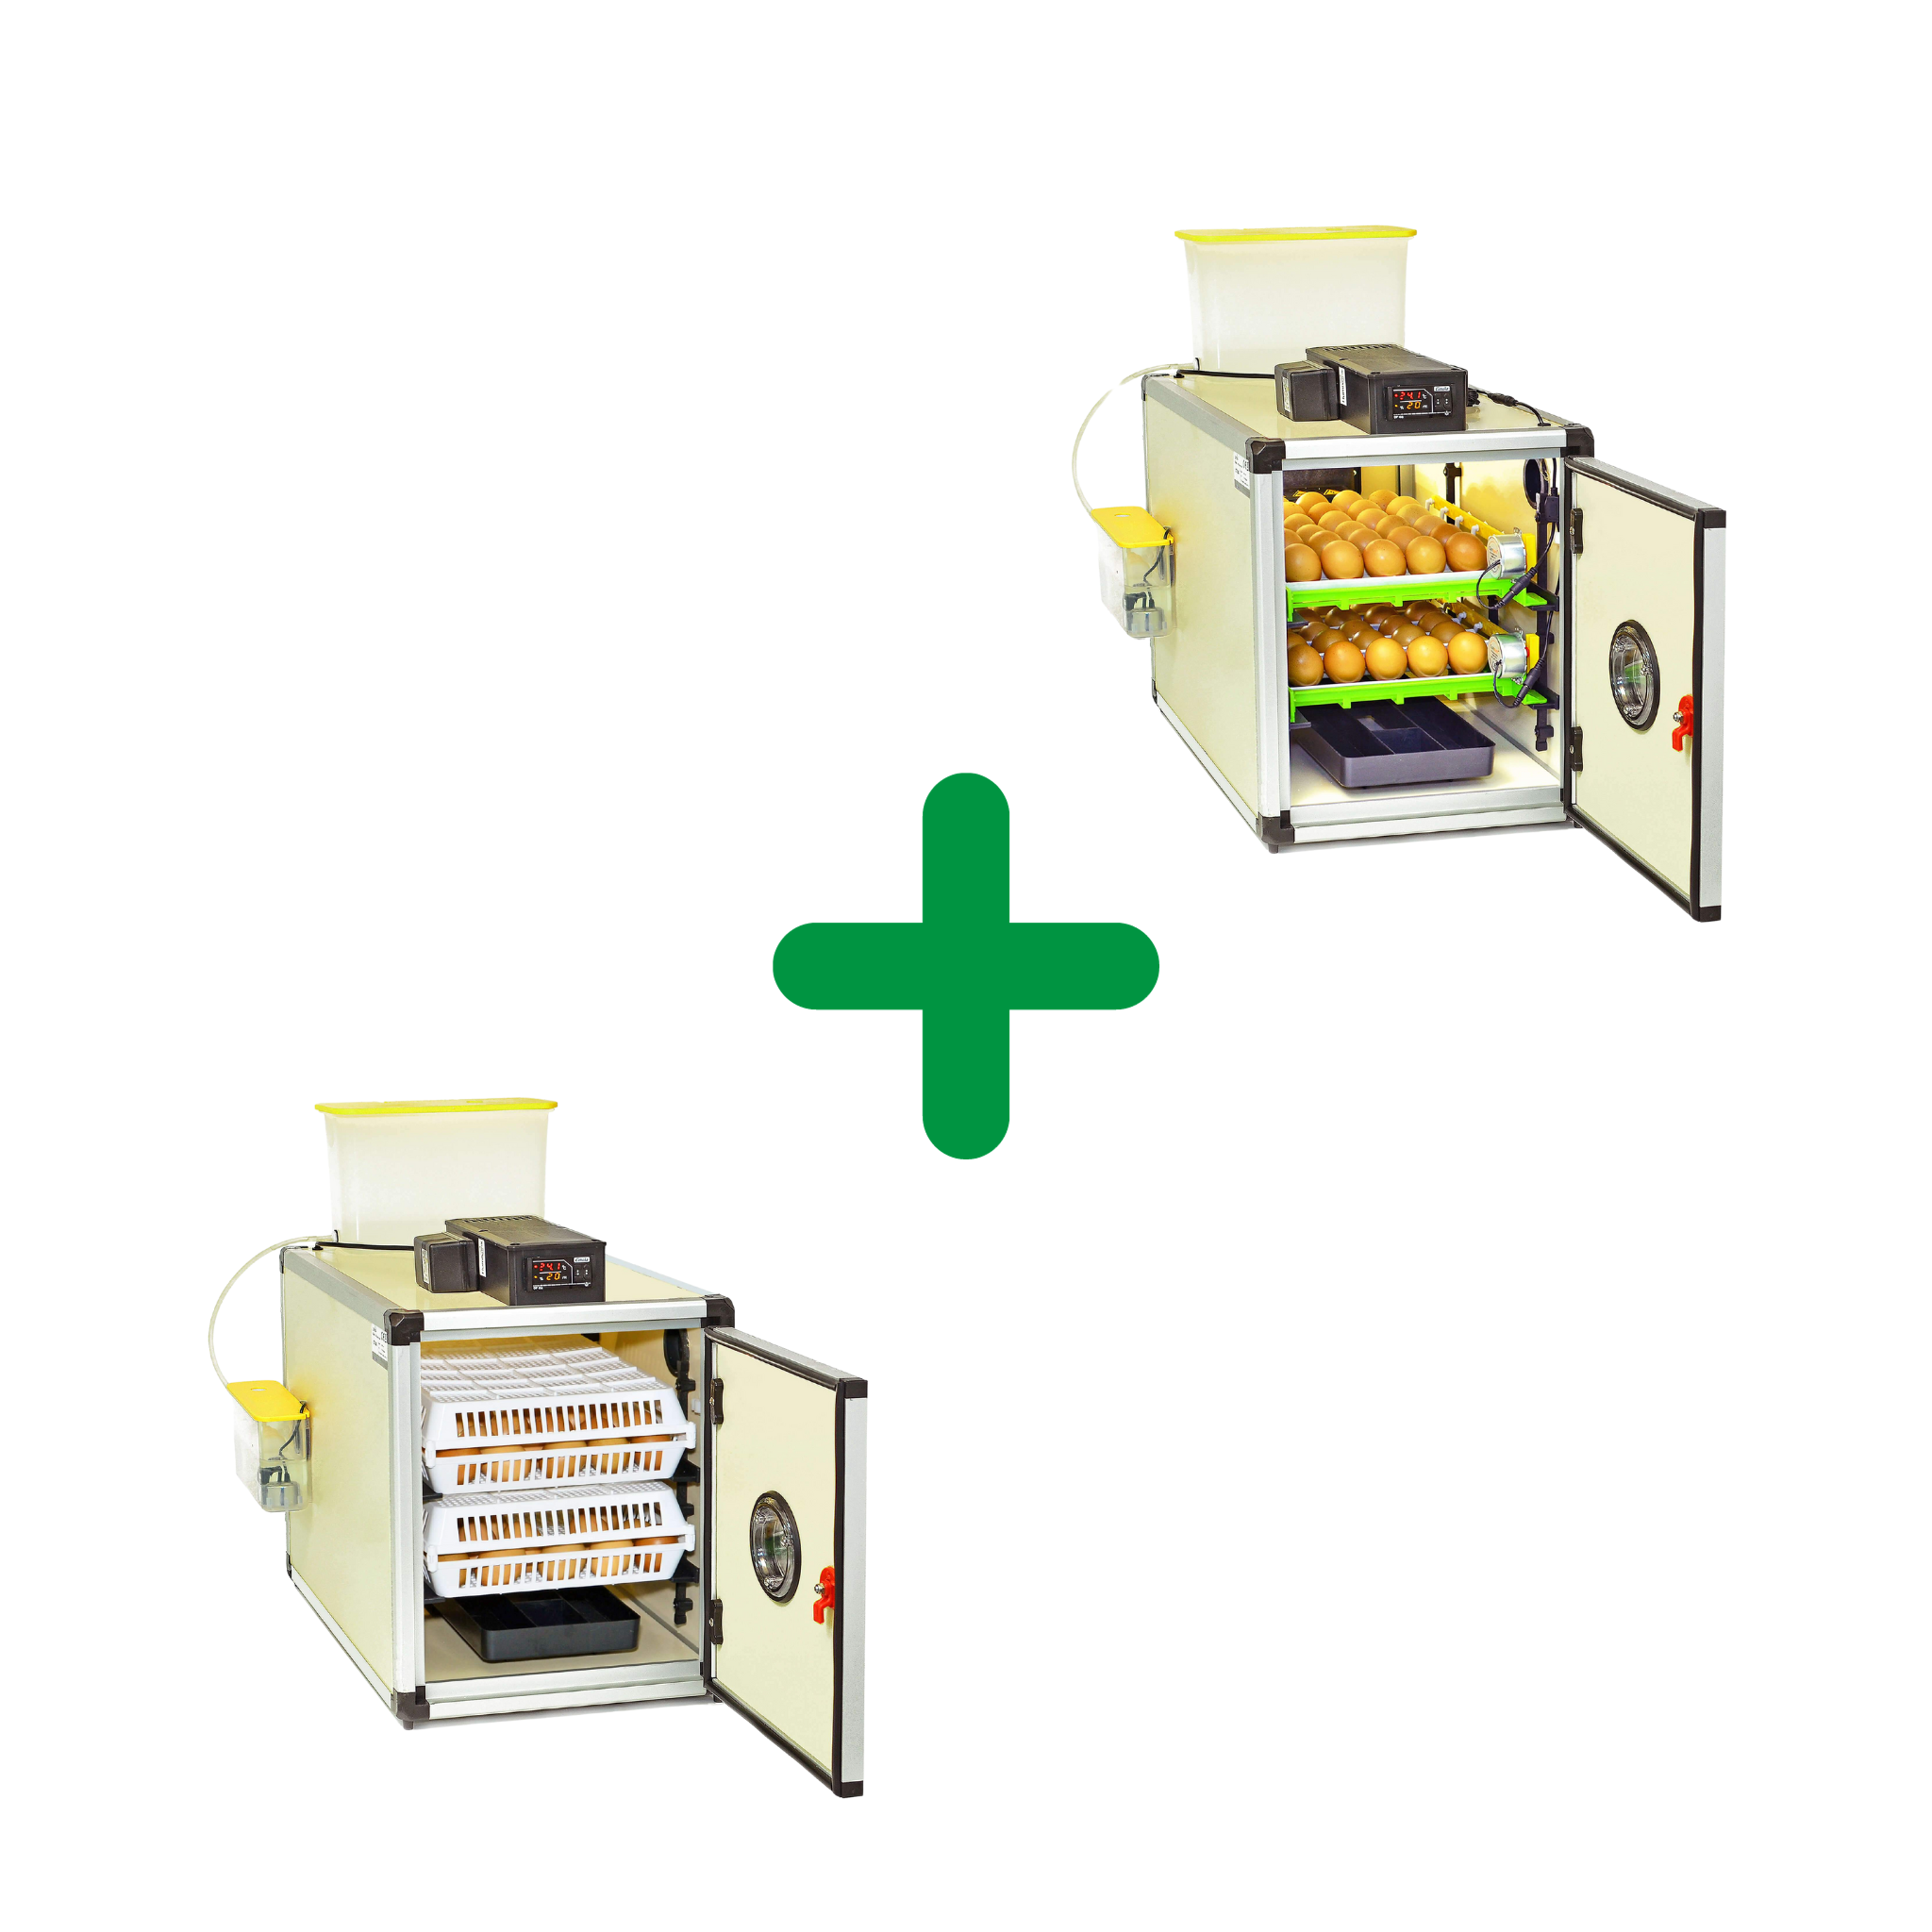 120 Egg Hatchery Incubator Kit picture showing two CT60SH units. Doors are open on both units that have a Digital Control panel and Humisonic humidifiers included. Top right of image has automatic turning trays filled with brown chicken eggs. Bottom left of image shows incubator with full hatching baskets. Green plus sign shows that kit includes both items.